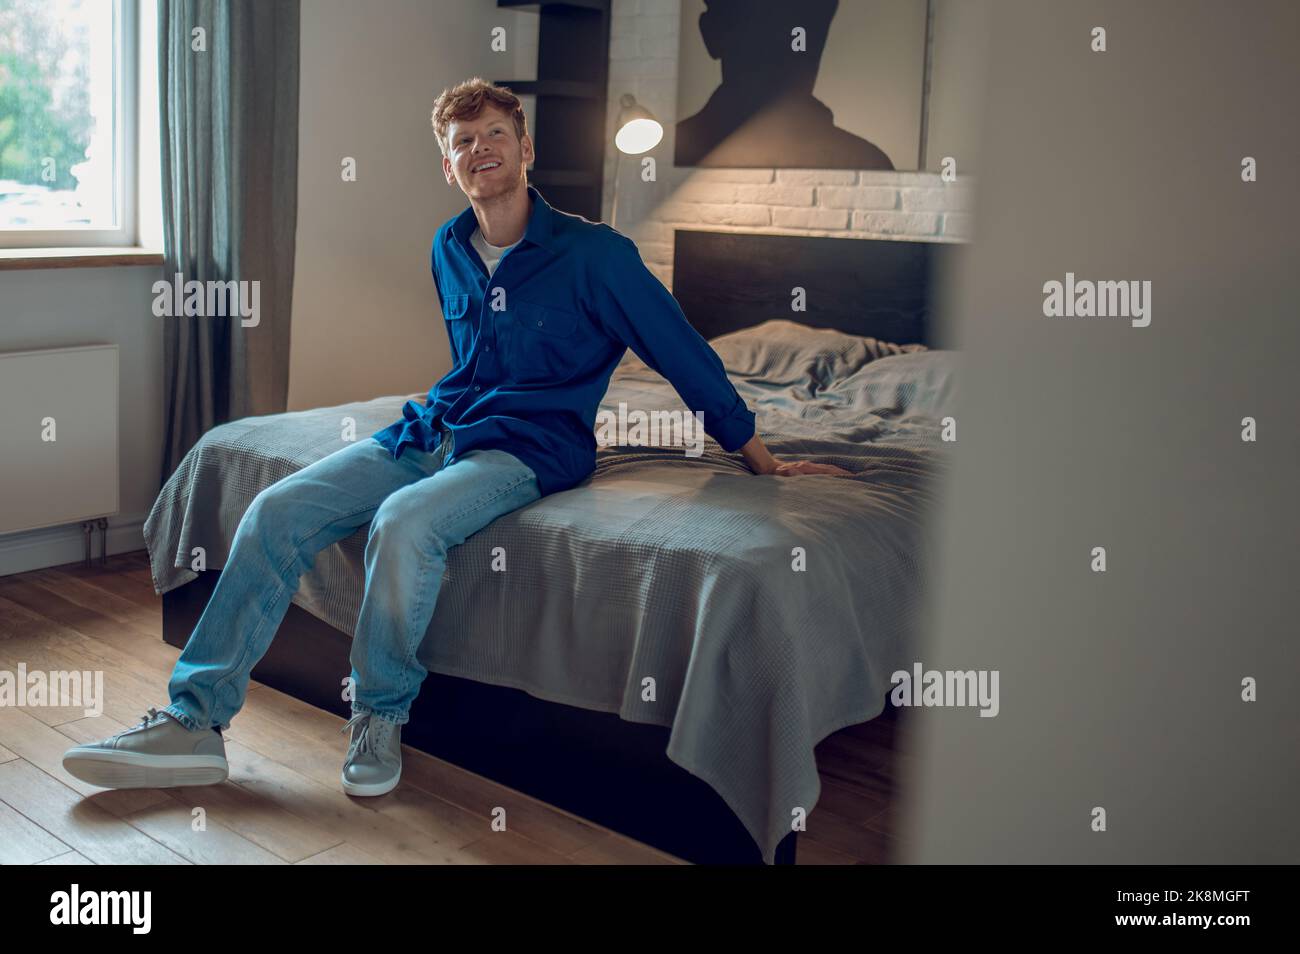 A young man in dark-blue shirt sitting on the bed Stock Photo